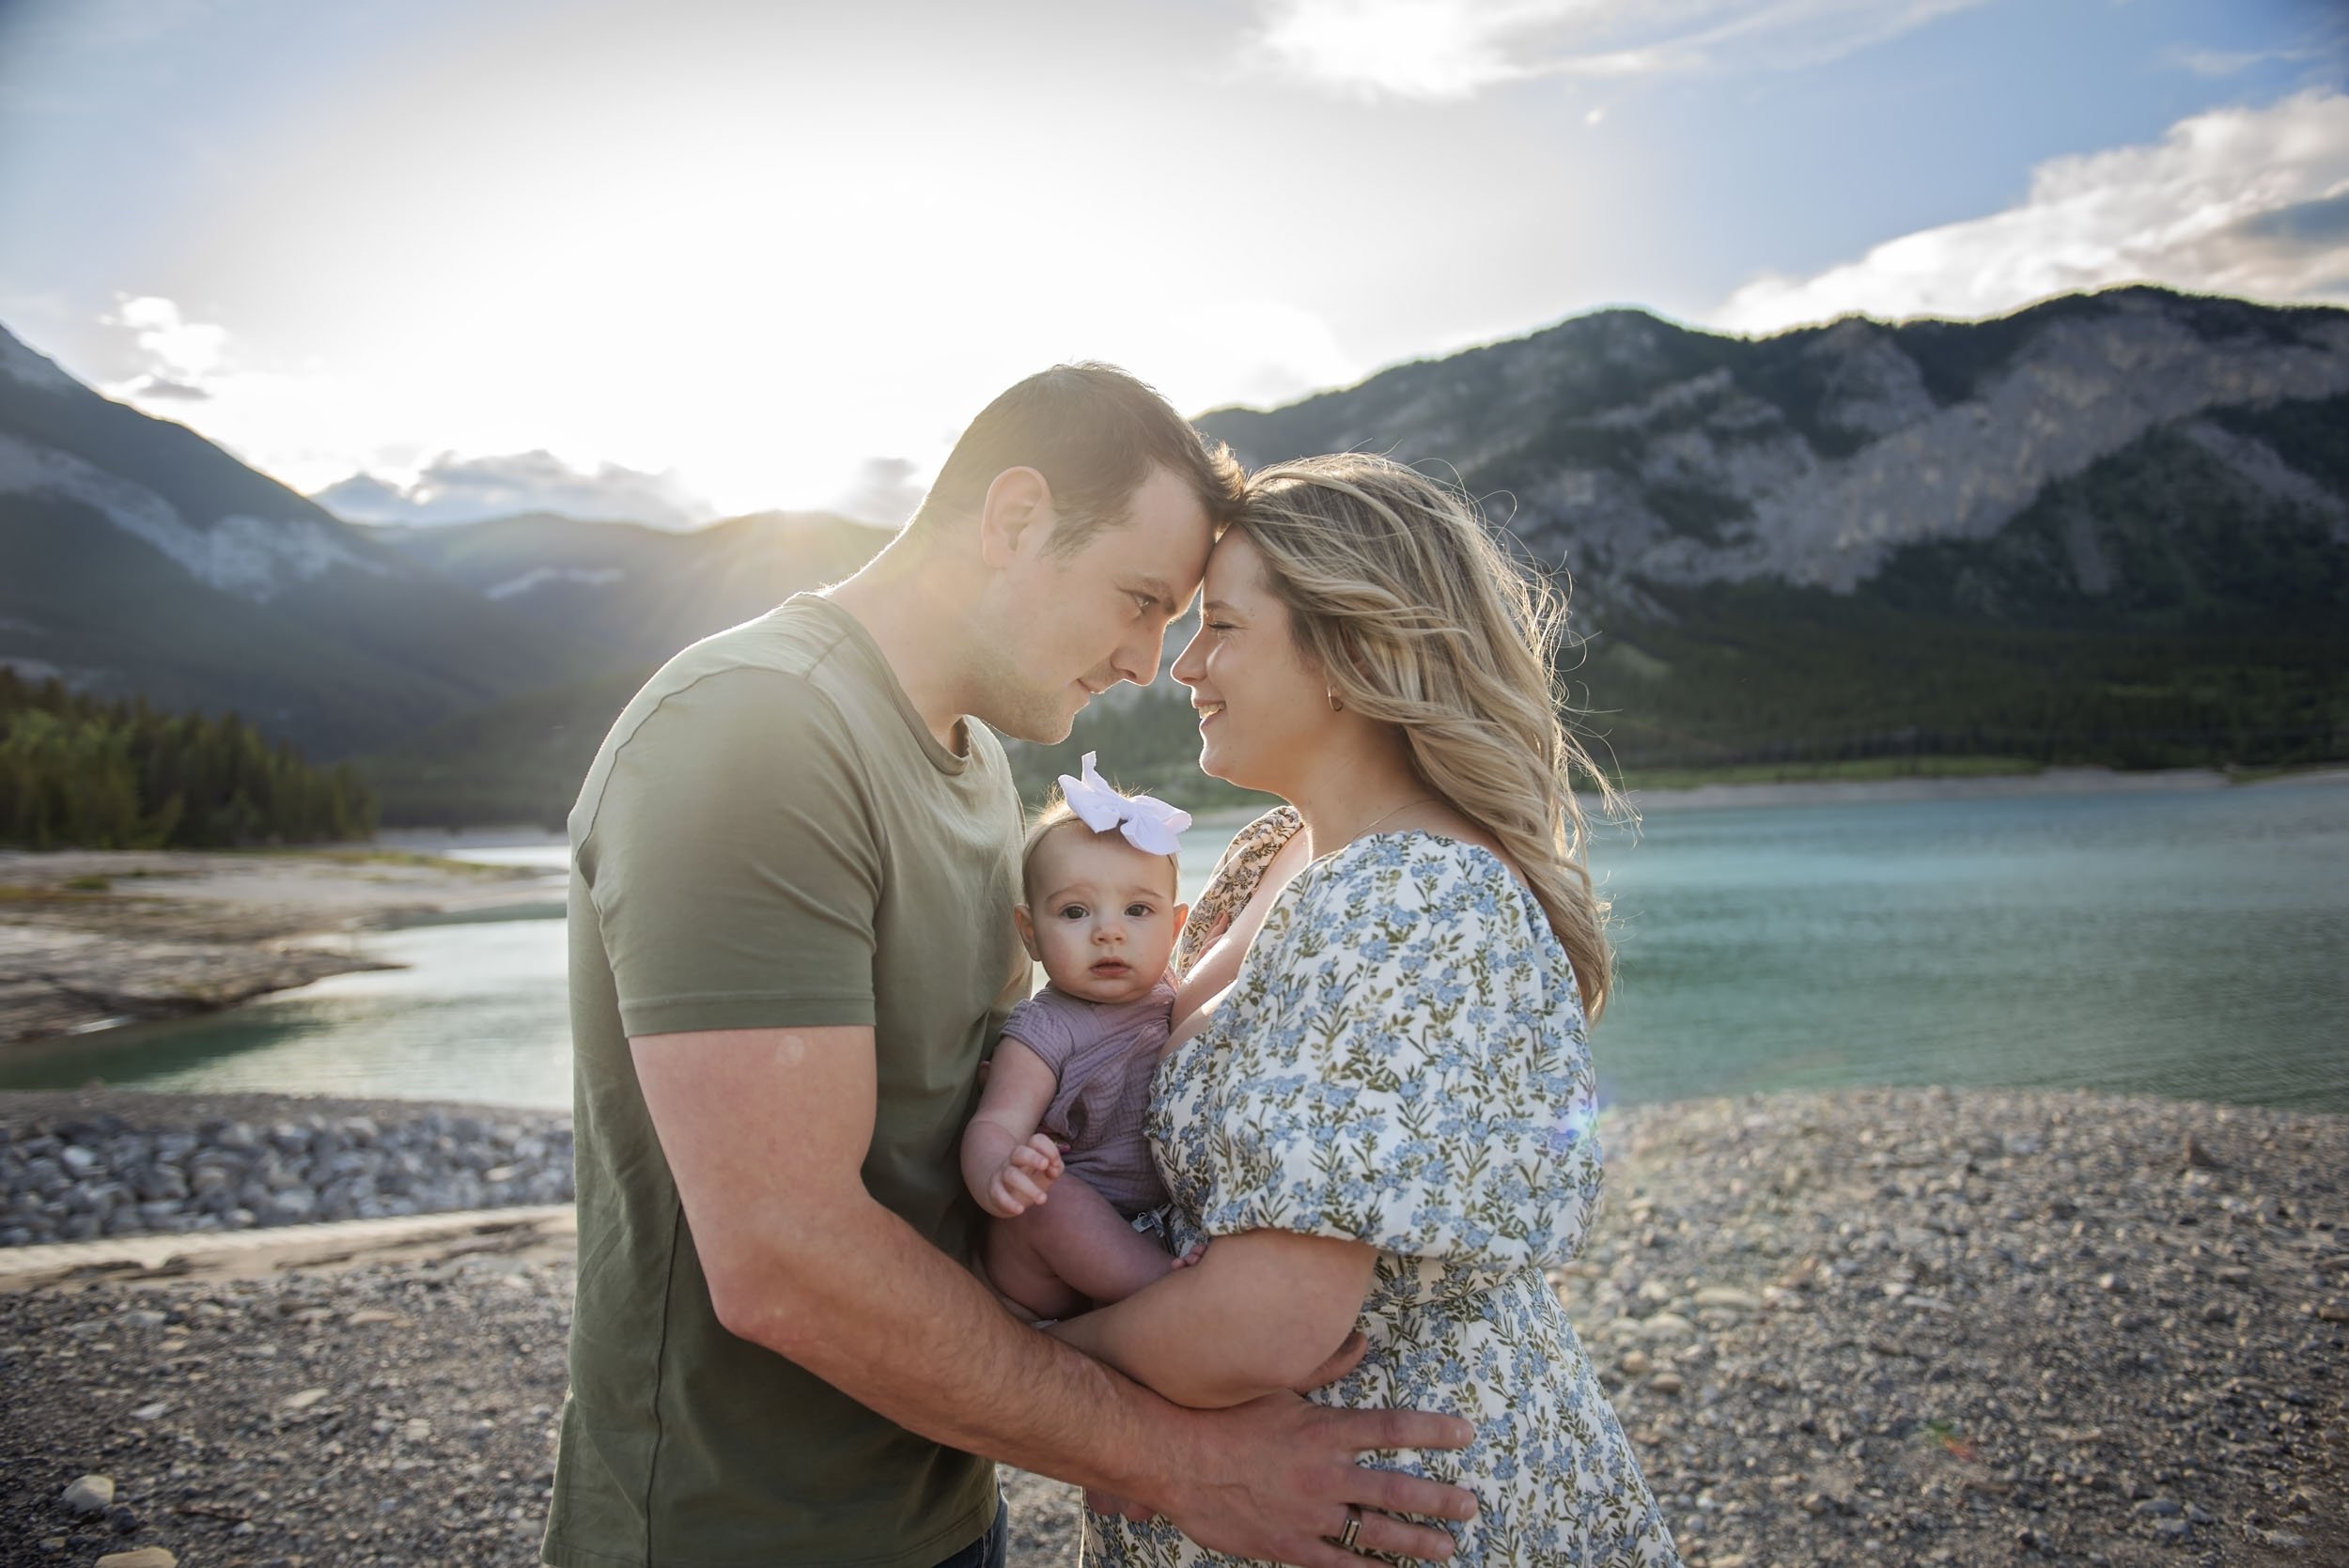 Lace and locket photo Airdrie Calgary Family Photographer-72.jpg